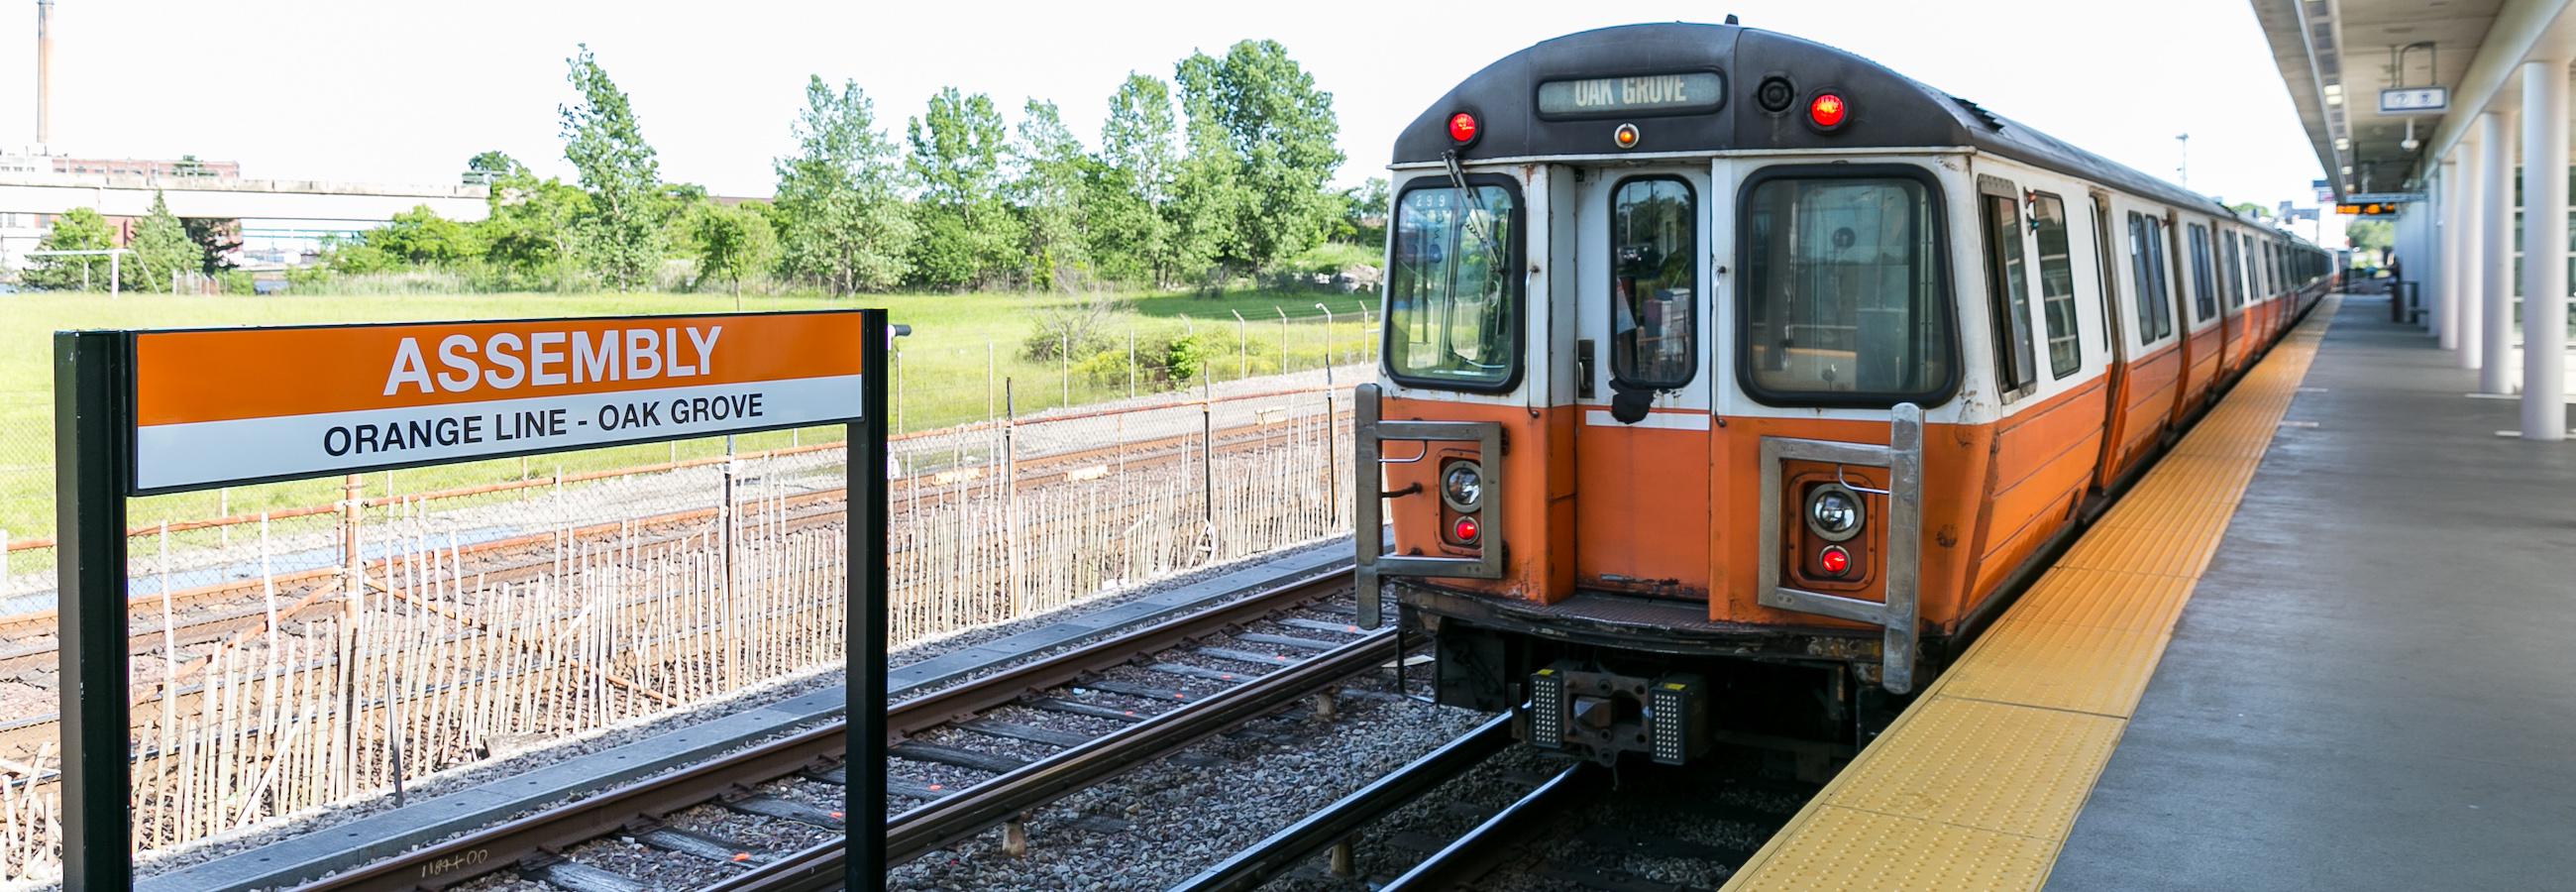 Orange Line Train Pulling into Assembly Station with Sign